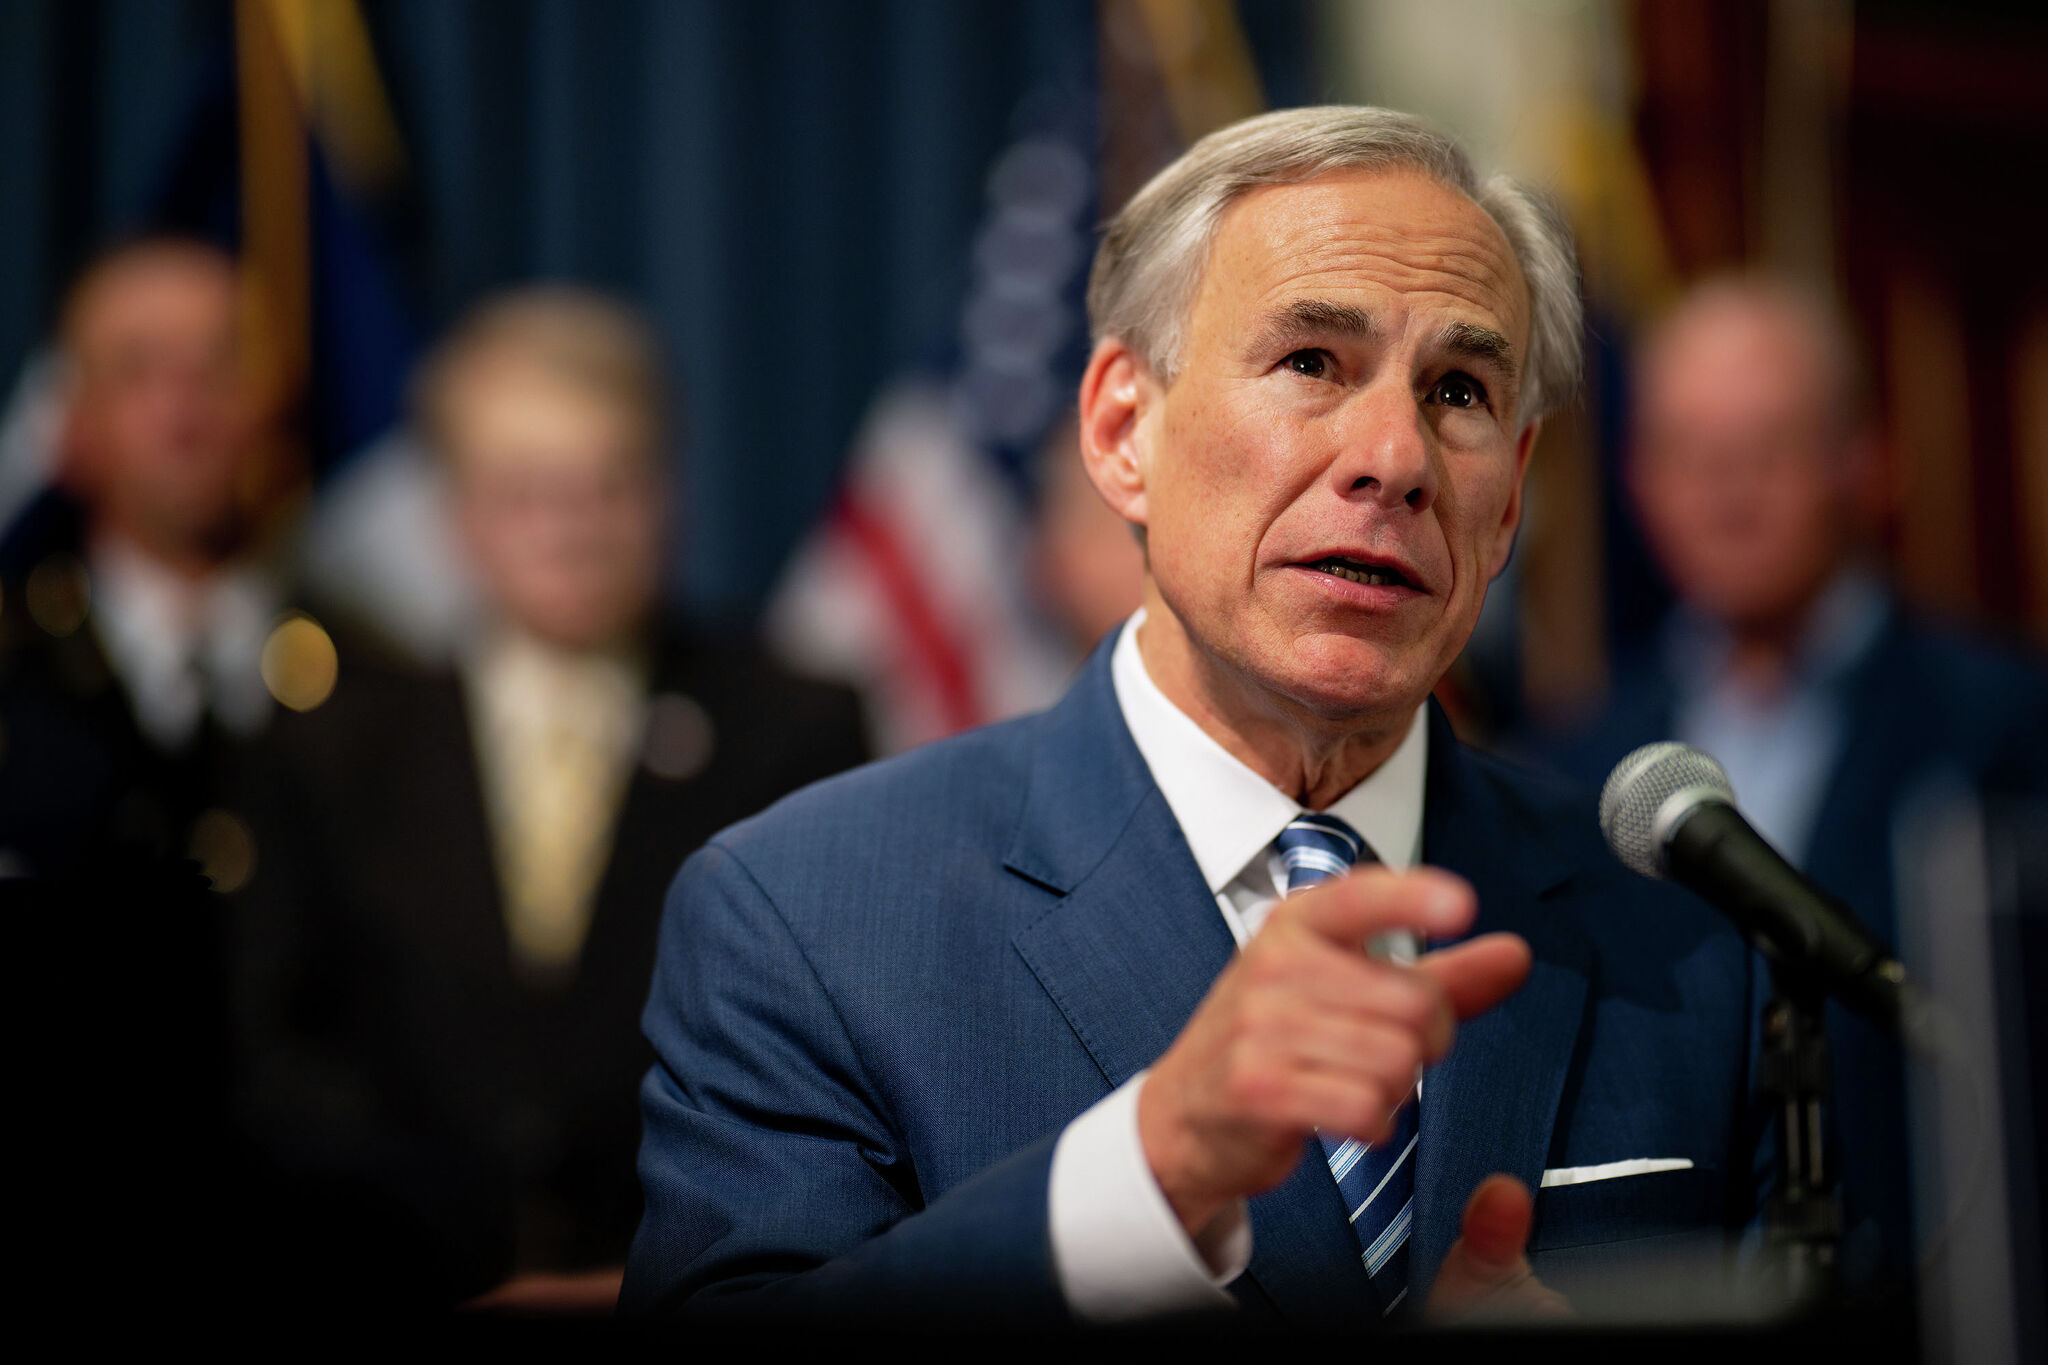 What to know about Gov. Abbott's special session